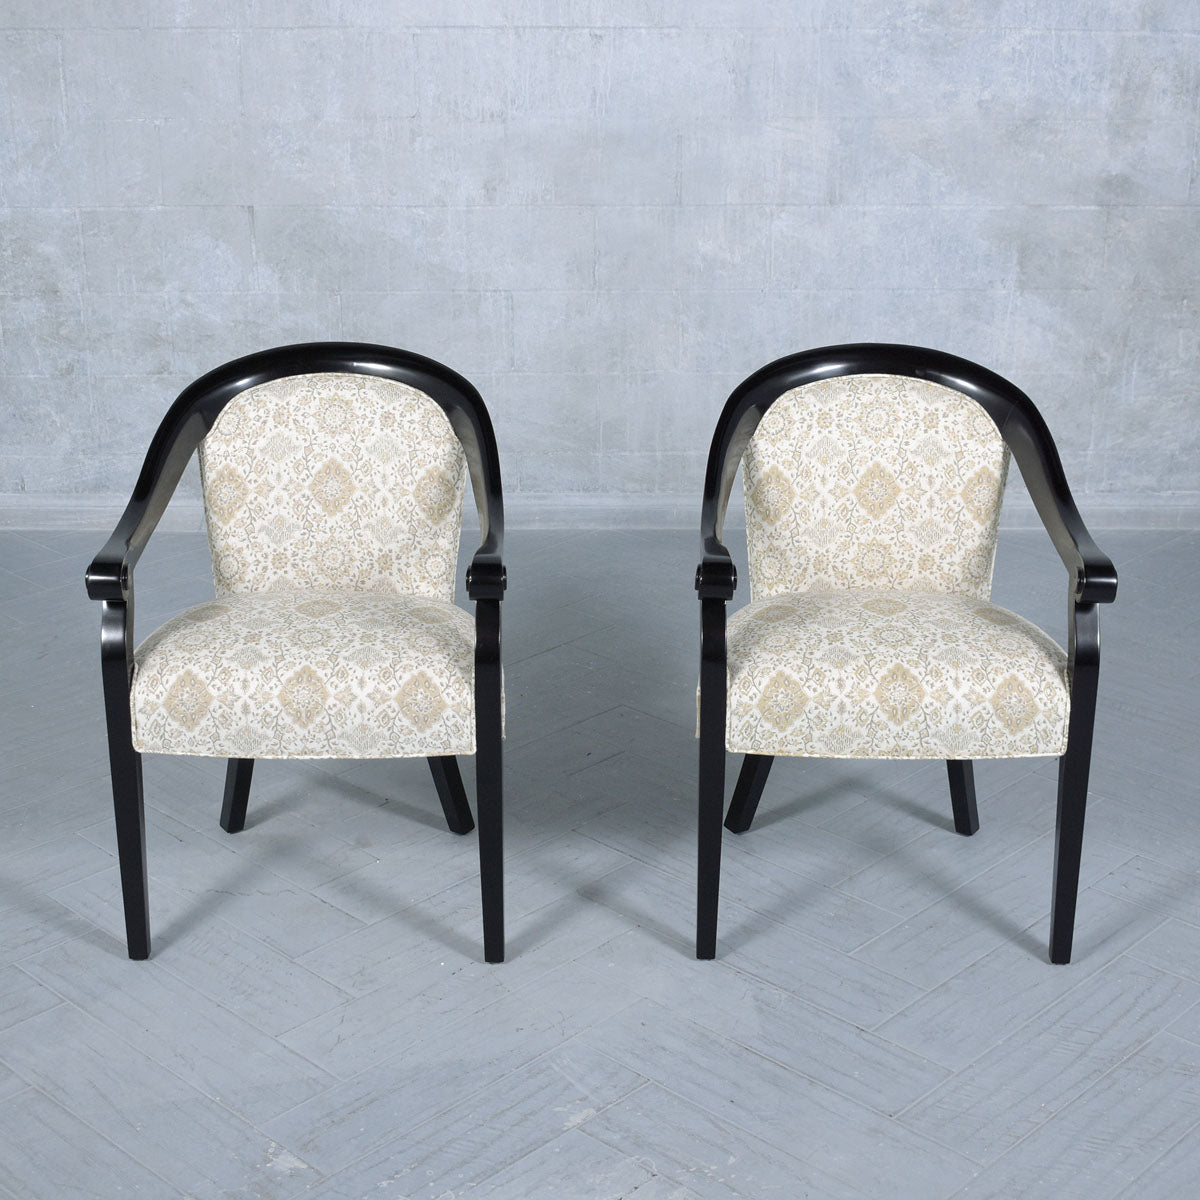 Pair of Modern Lacquered Arm Chairs by Hickory